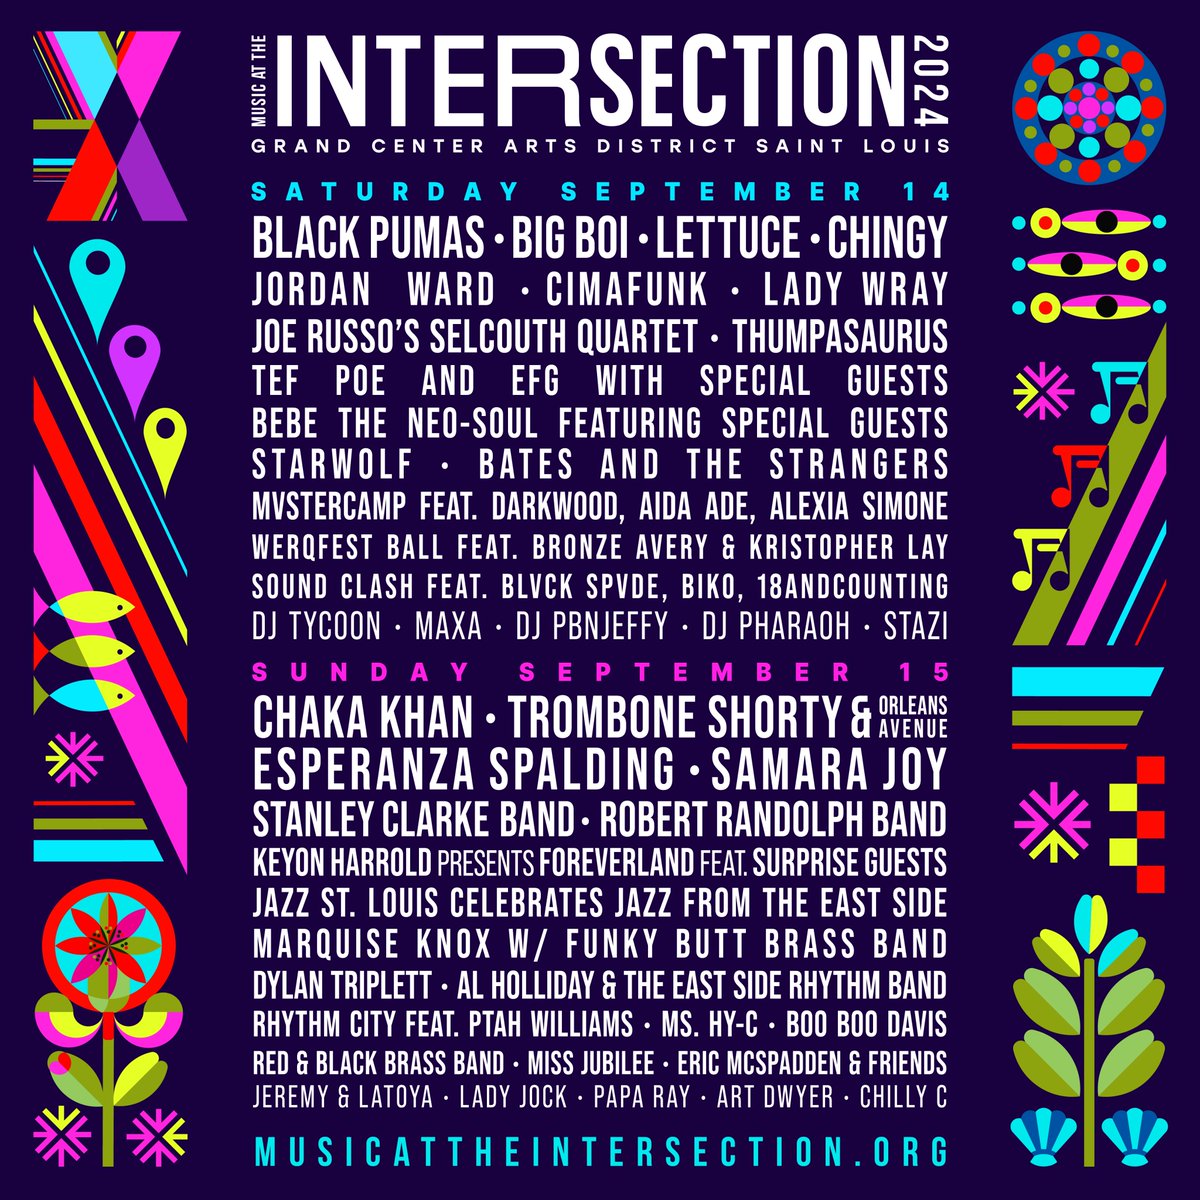 ST. LOUIS, WE LOVE YA BABY AND YOUR SUPER COOL SPECIAL PIZZA! WE ARE HONORED TO PLAY @Music_Intersect ON THIS COOL LINEUP IN SEPTEMBER FOR YOU – SEE YA THERE 🤠🤠🤠🤠 TIX ON SALE FRIDAY AT 10AM CT — MusicAtTheIntersection.org #MATI